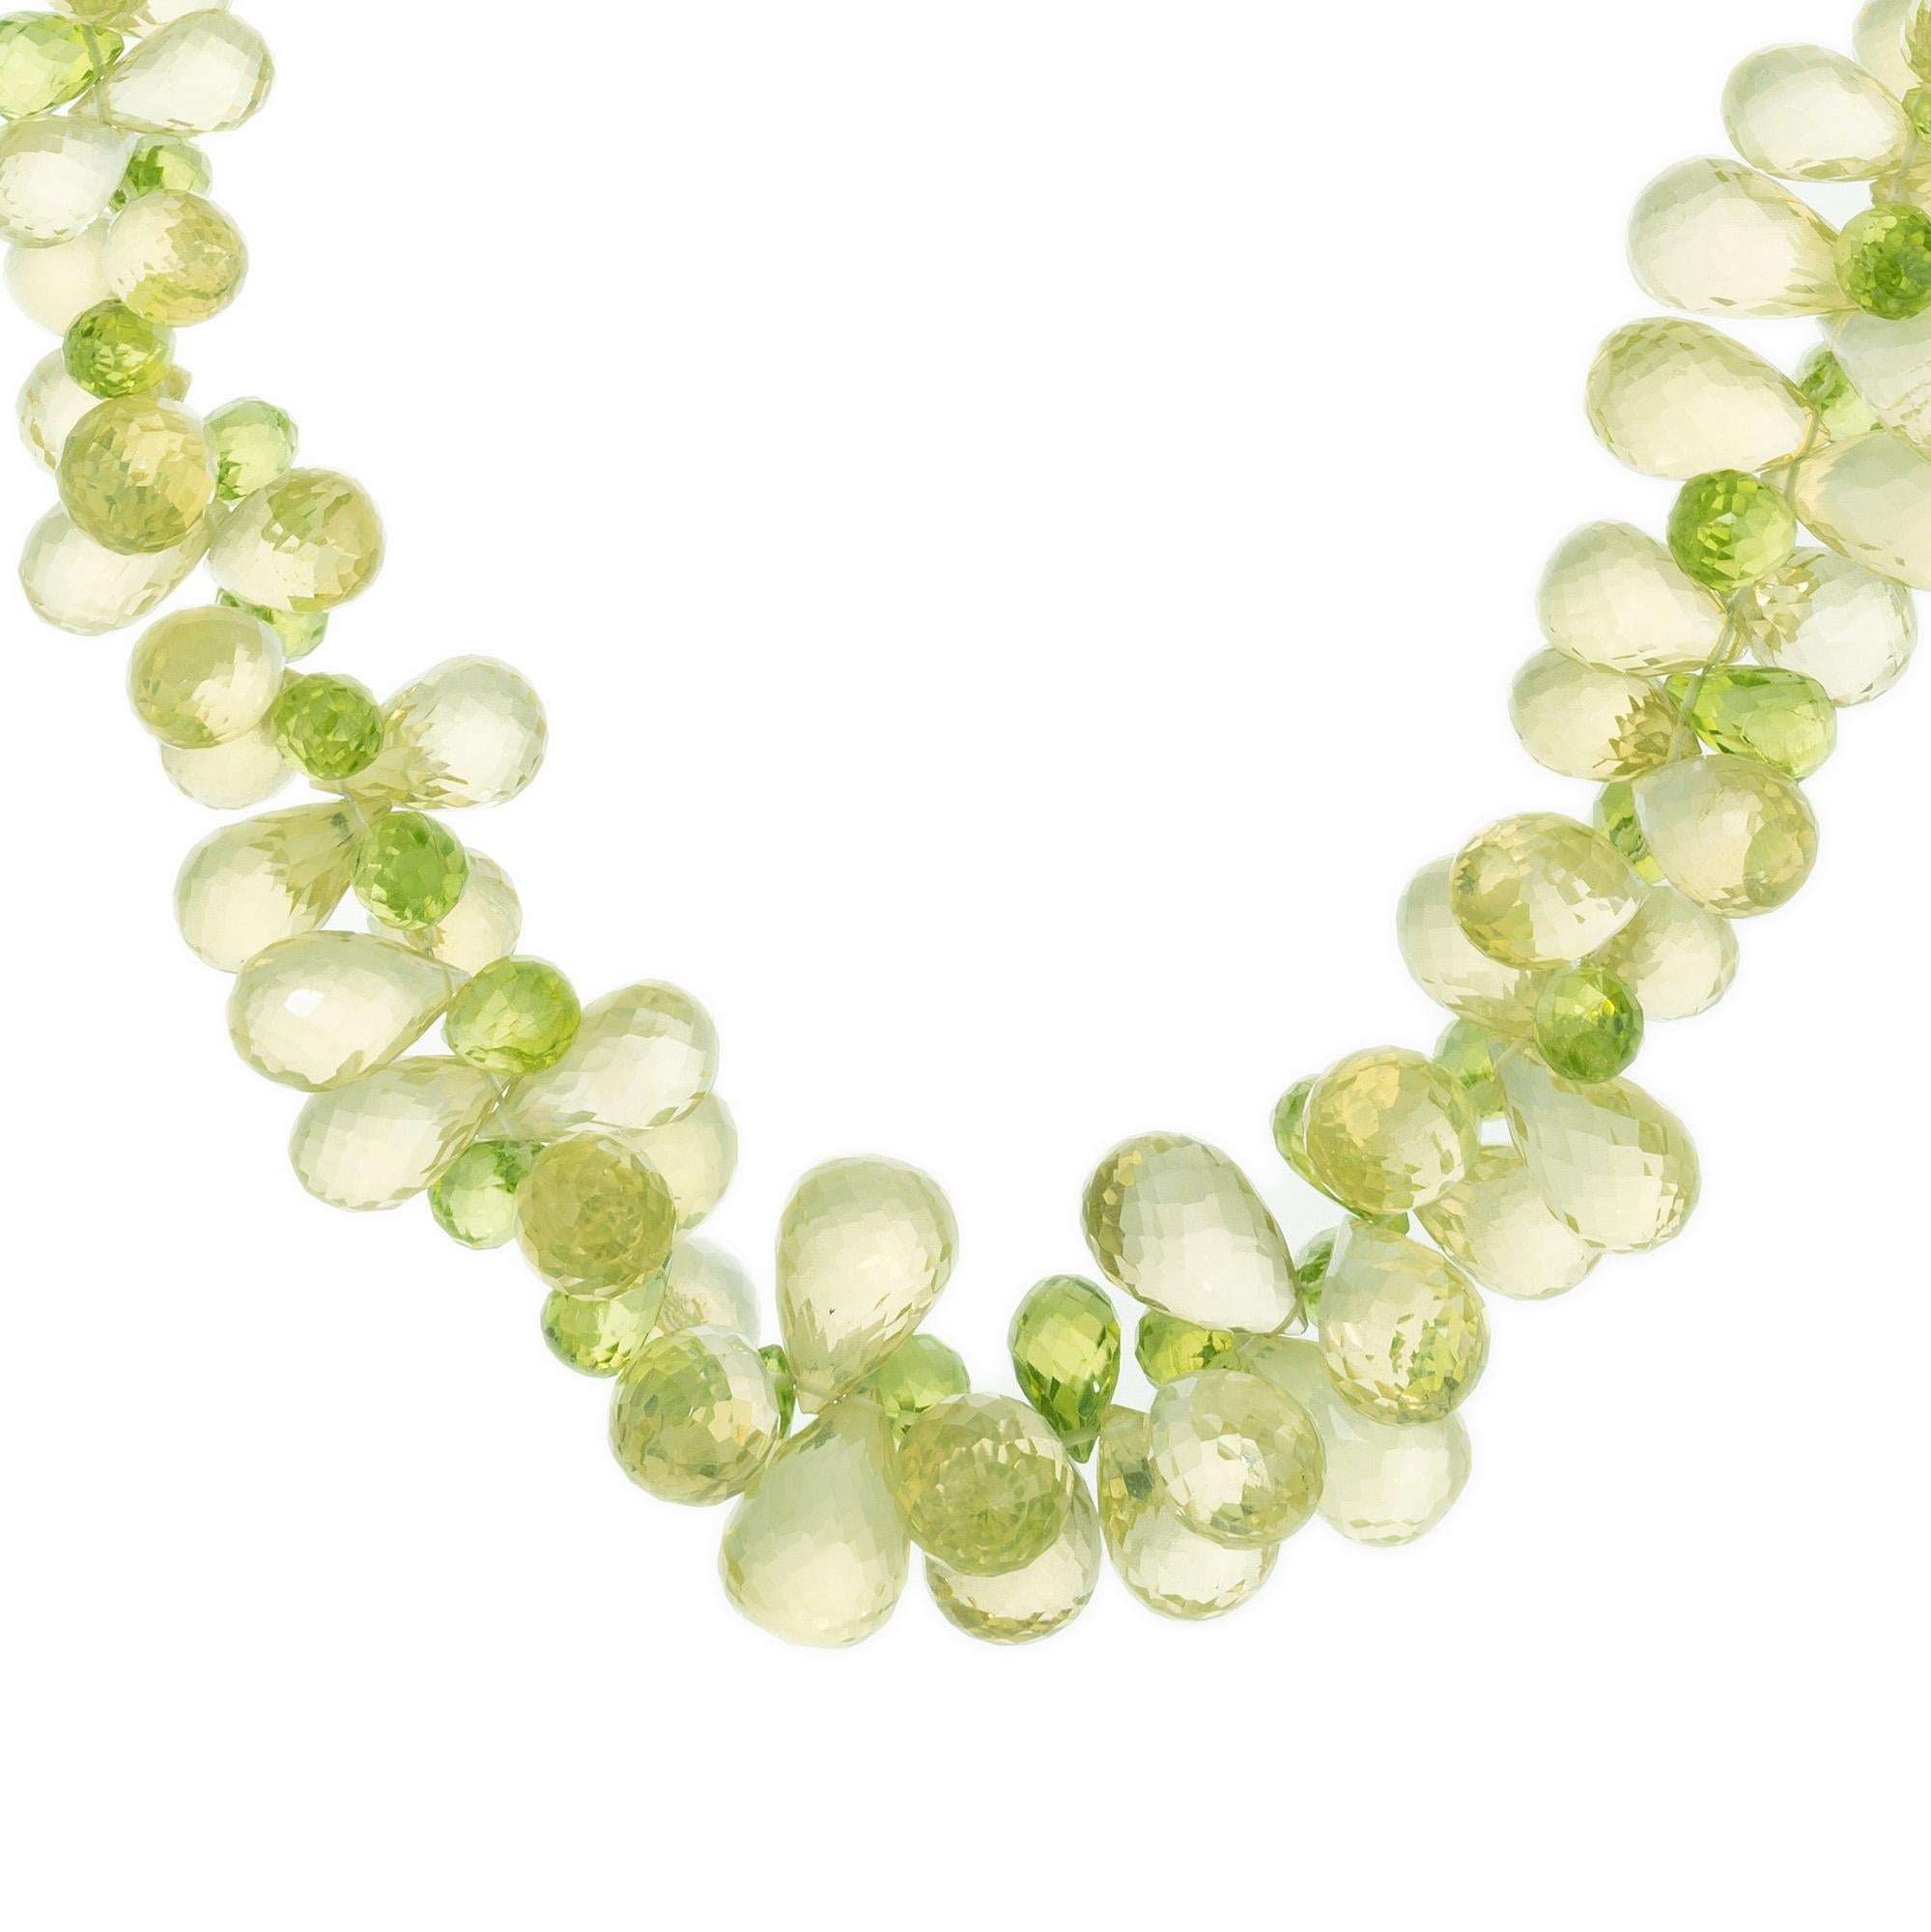 Pear peridot and citrine green and yellow briolette bead gold necklace. The 200 graduated briolette beads boasts a harmonious blend of vibrant yellow and green peridot and citrine gemstones beautifully arranged in a cluster design. The carat weight